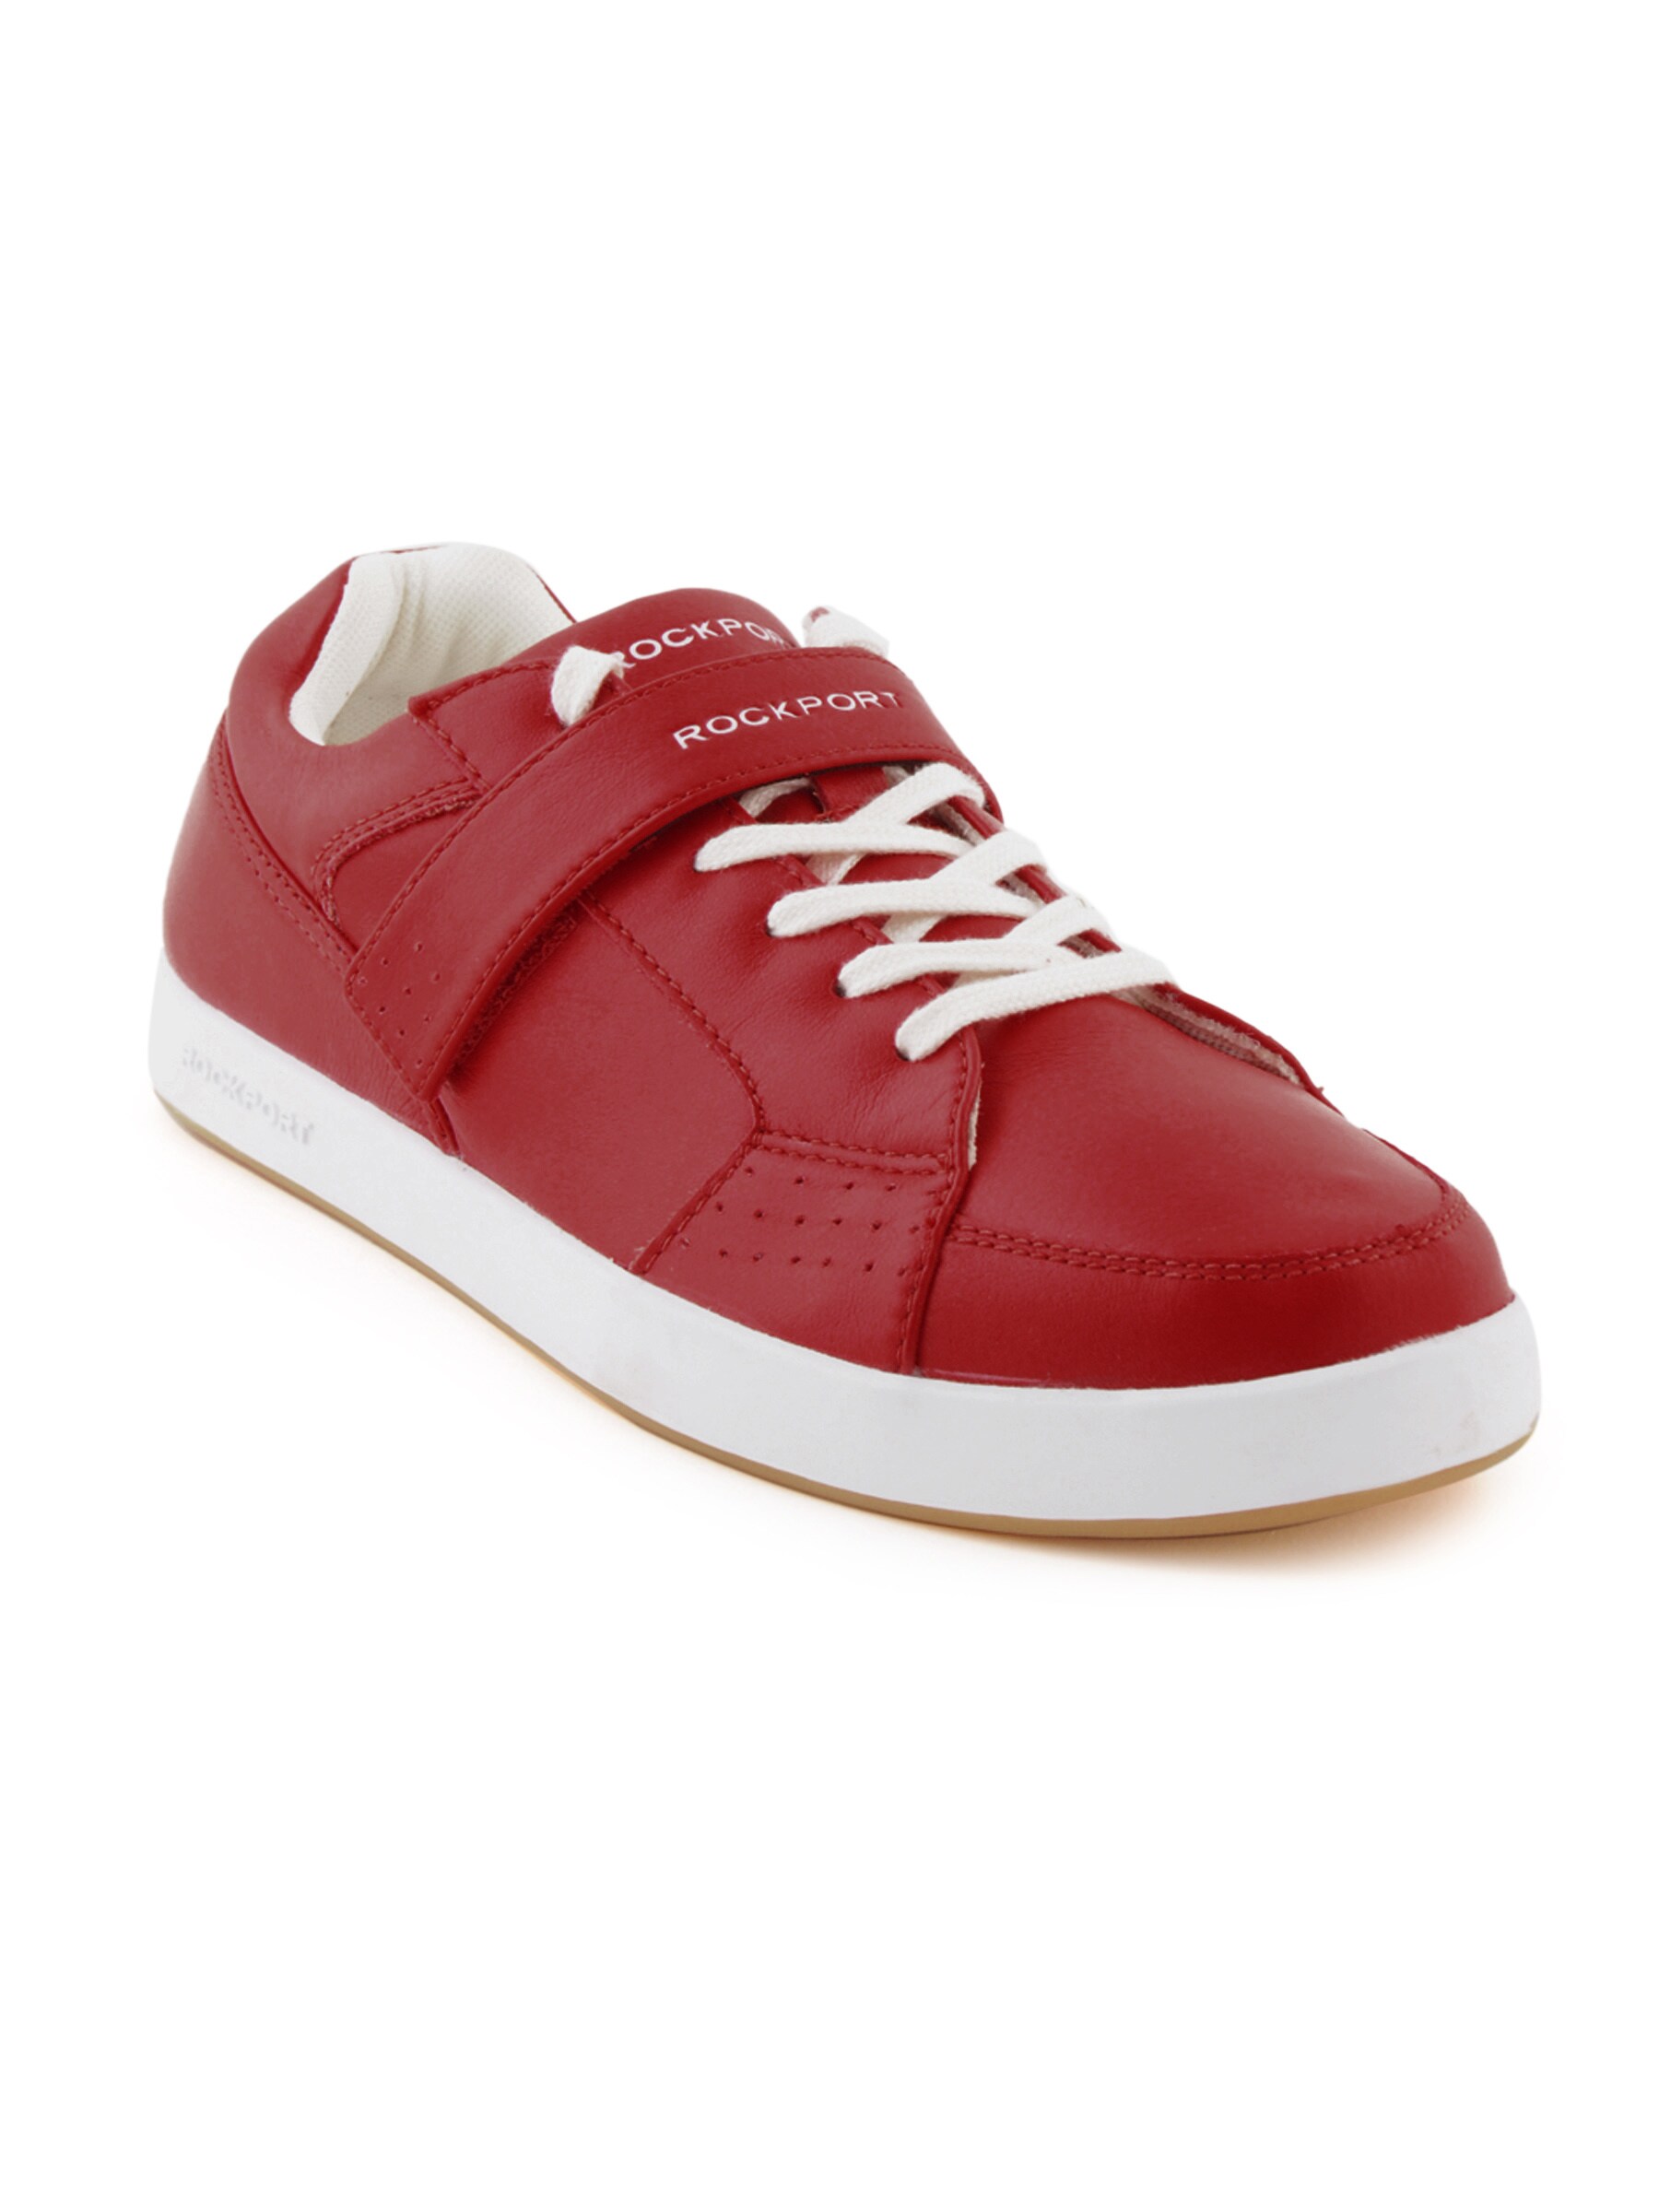 Rockport Men LLandro Red Casual Shoes